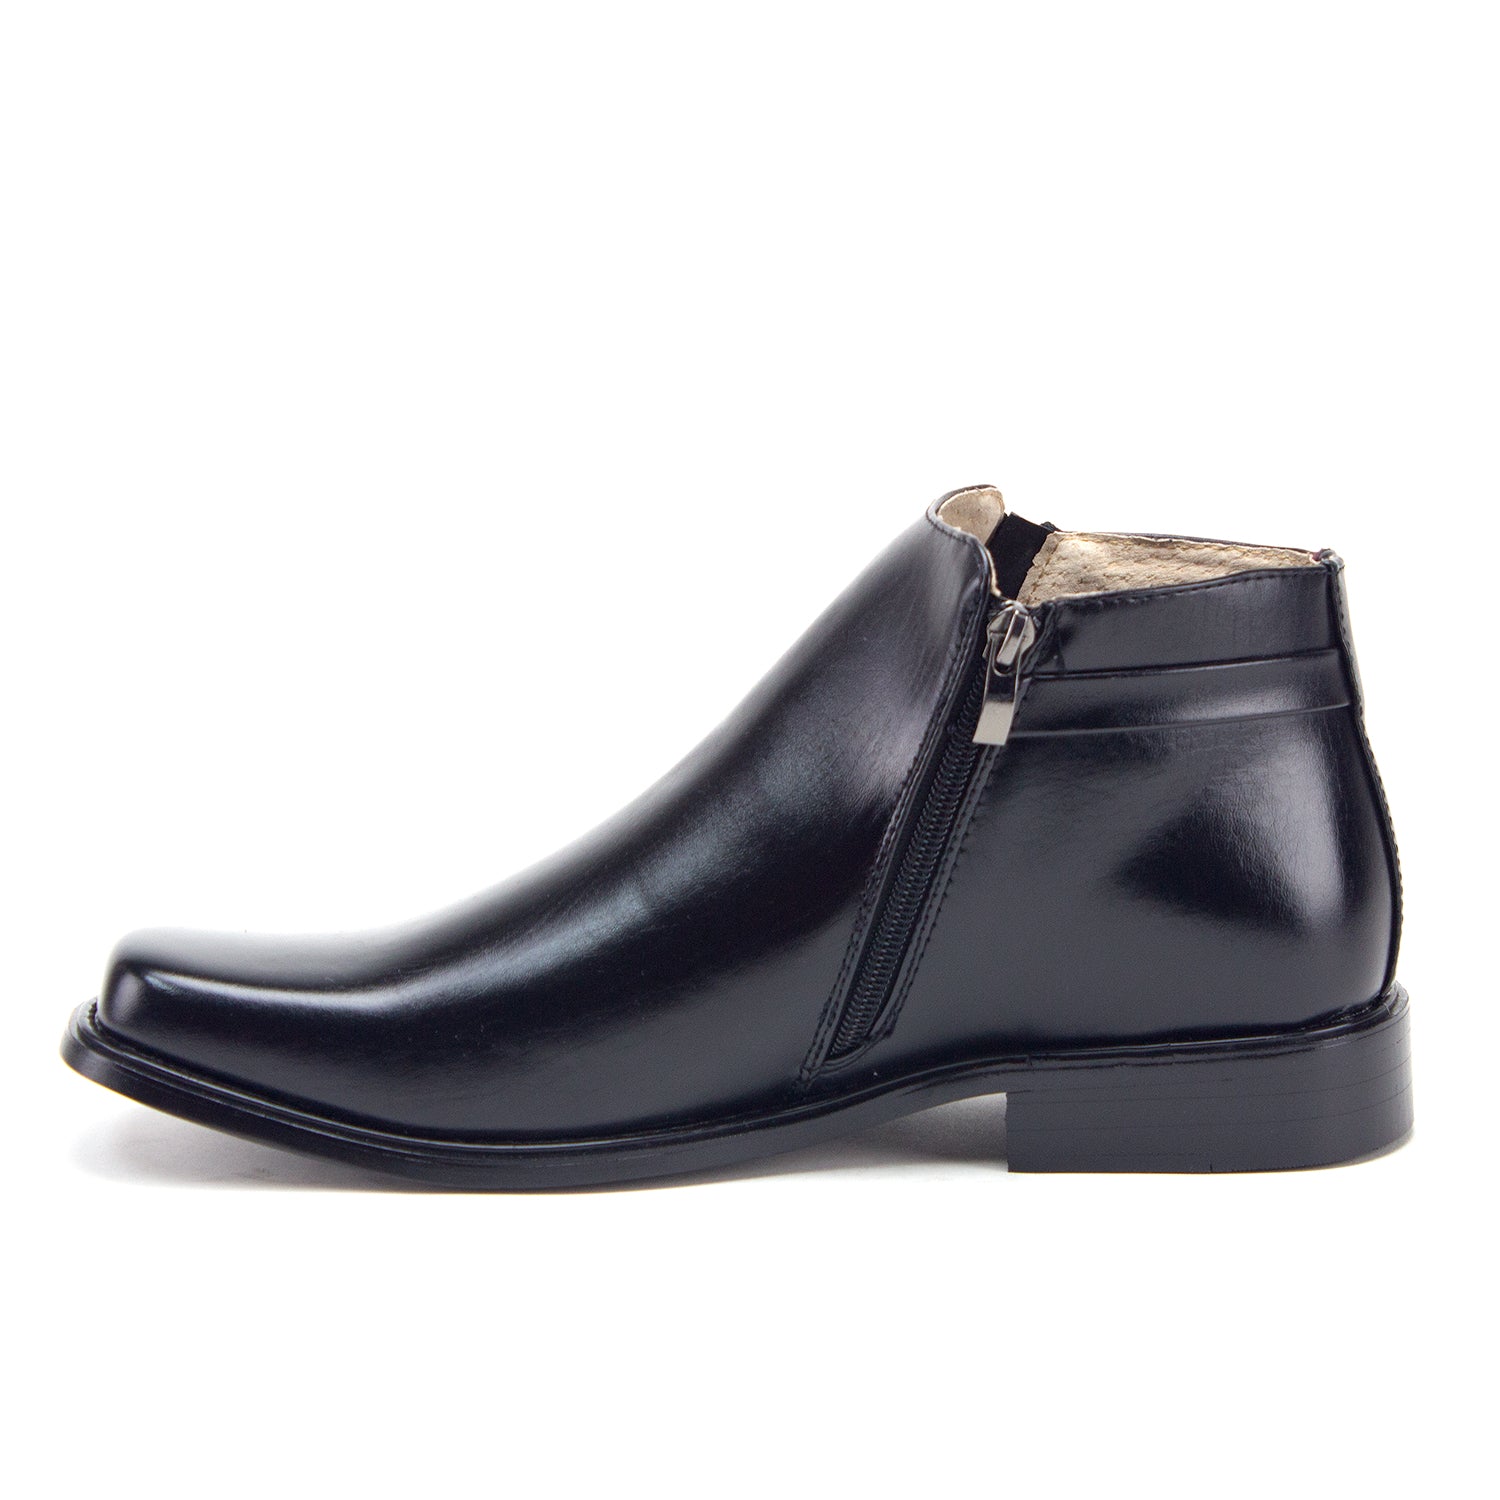 mens square toe ankle boots